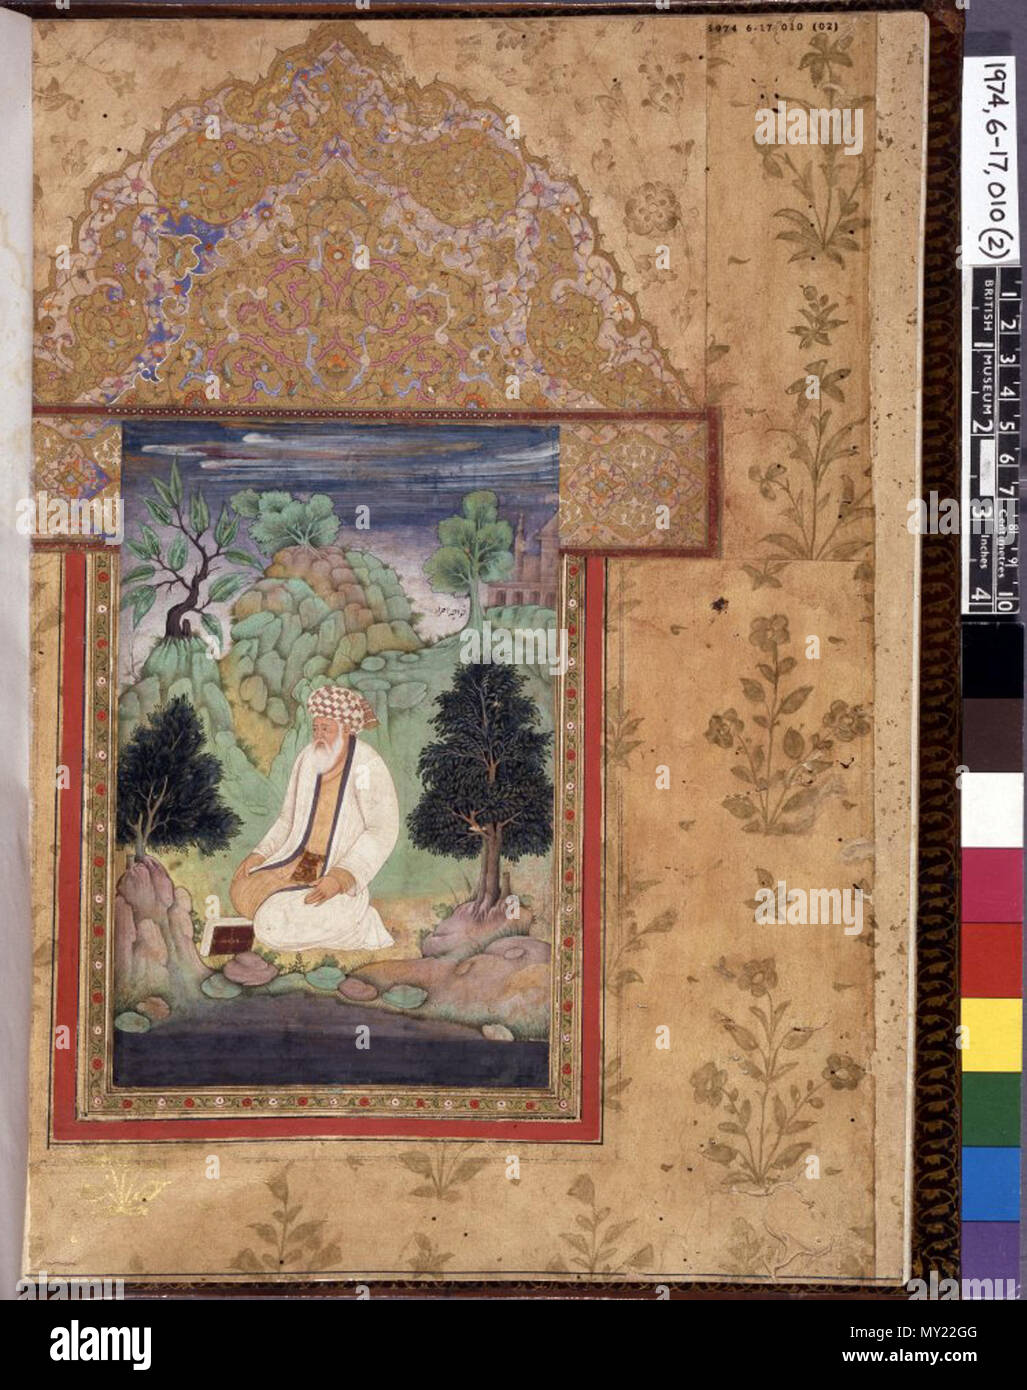 . English: Album Leaf (verso), painting on paper. Devotion. Shaykh Khwaja Ahrar seated by a stream. Inscribed. According to register, folio 1. See 1974,0617,0.10 for album description. 17thC 19thC. Khwajeh Awár 484 Shaykh Khwaja Ahrar Stock Photo